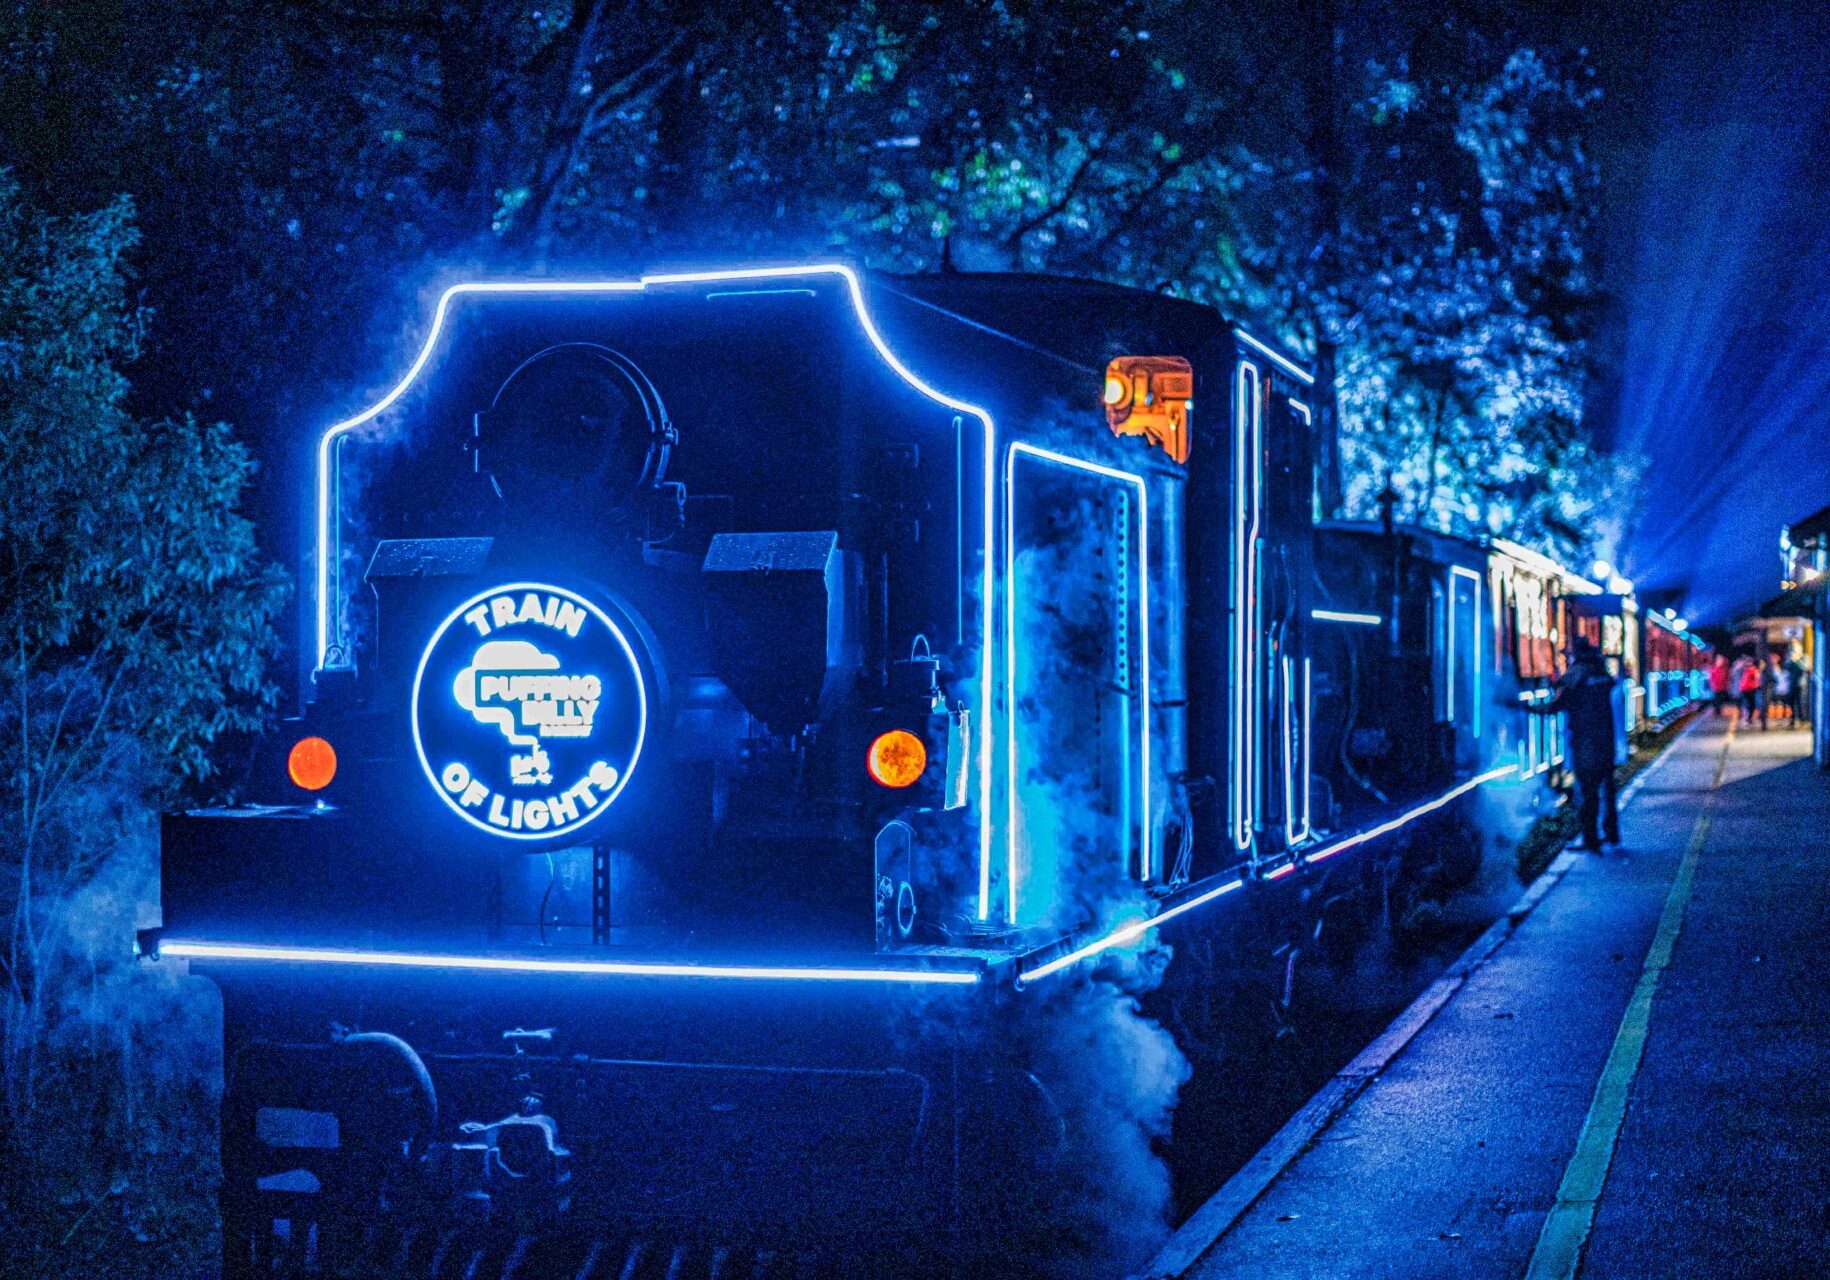 An illuminated train with blue hues sits at a platform. The front of the locomotive has a headboard saying Puffing Billy Railway Train of Lights. The blue hues illuminate the trees in the background.